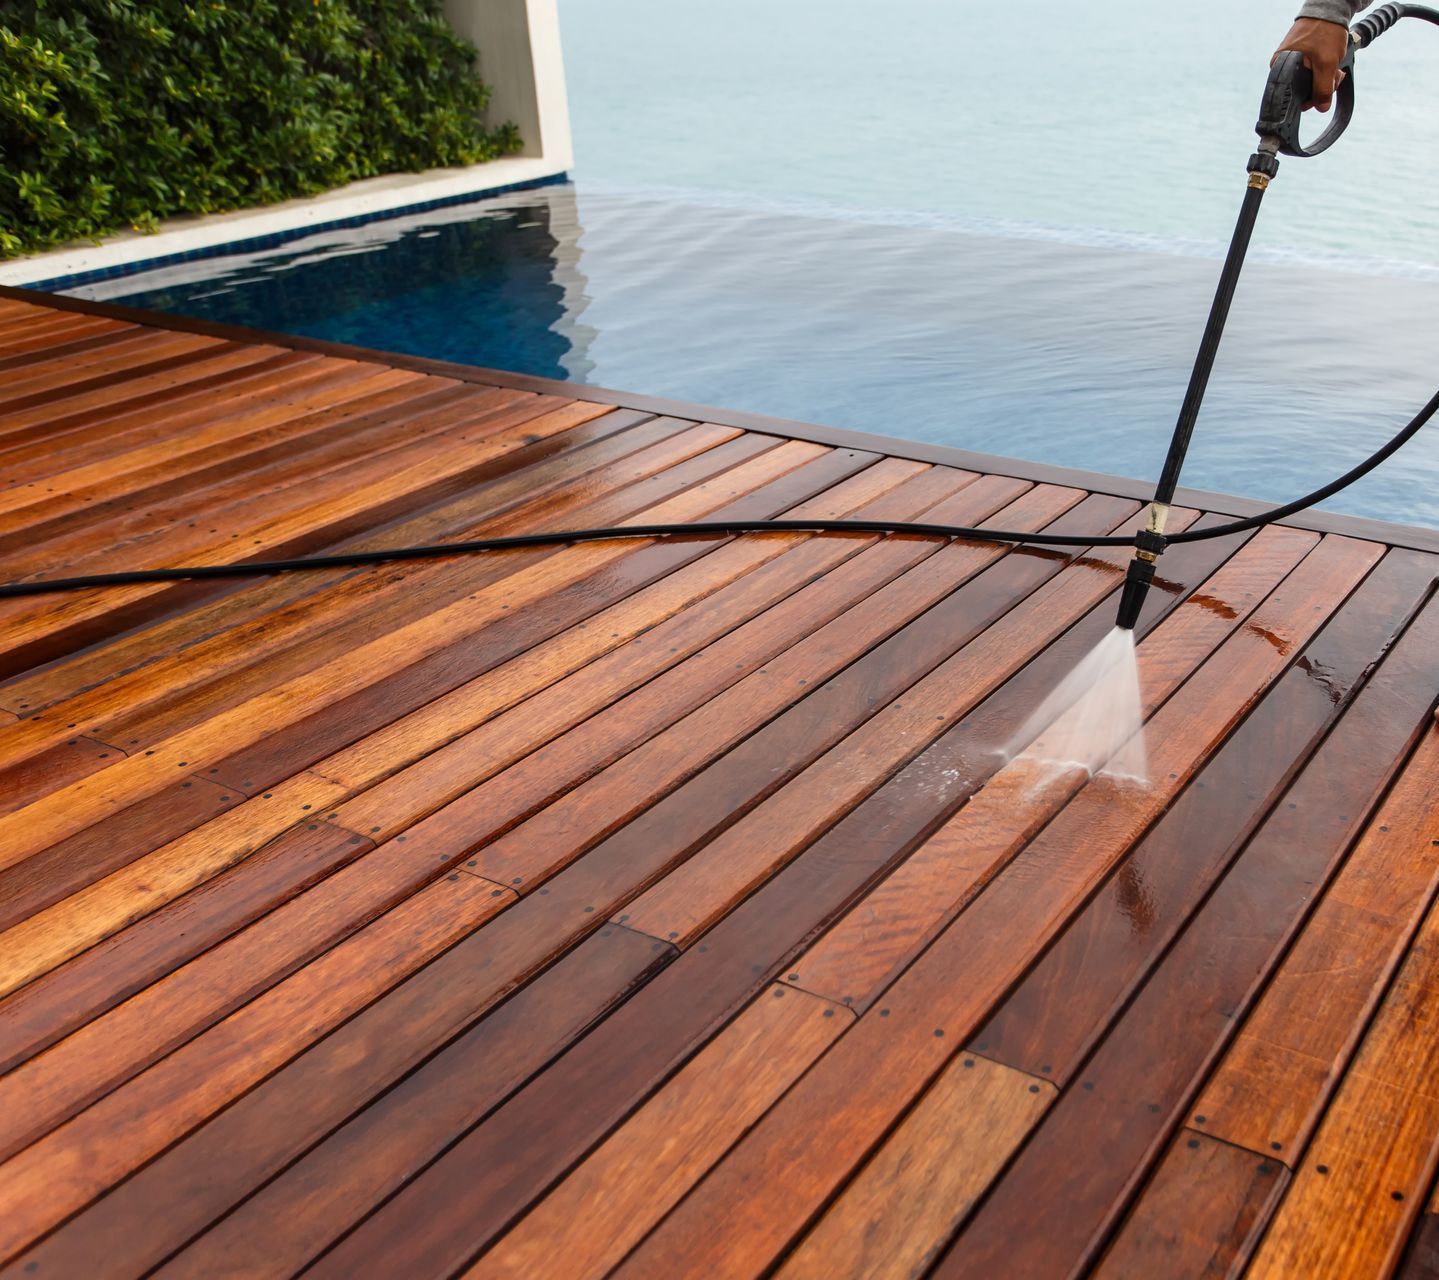 a person is cleaning a wooden deck next to a pool